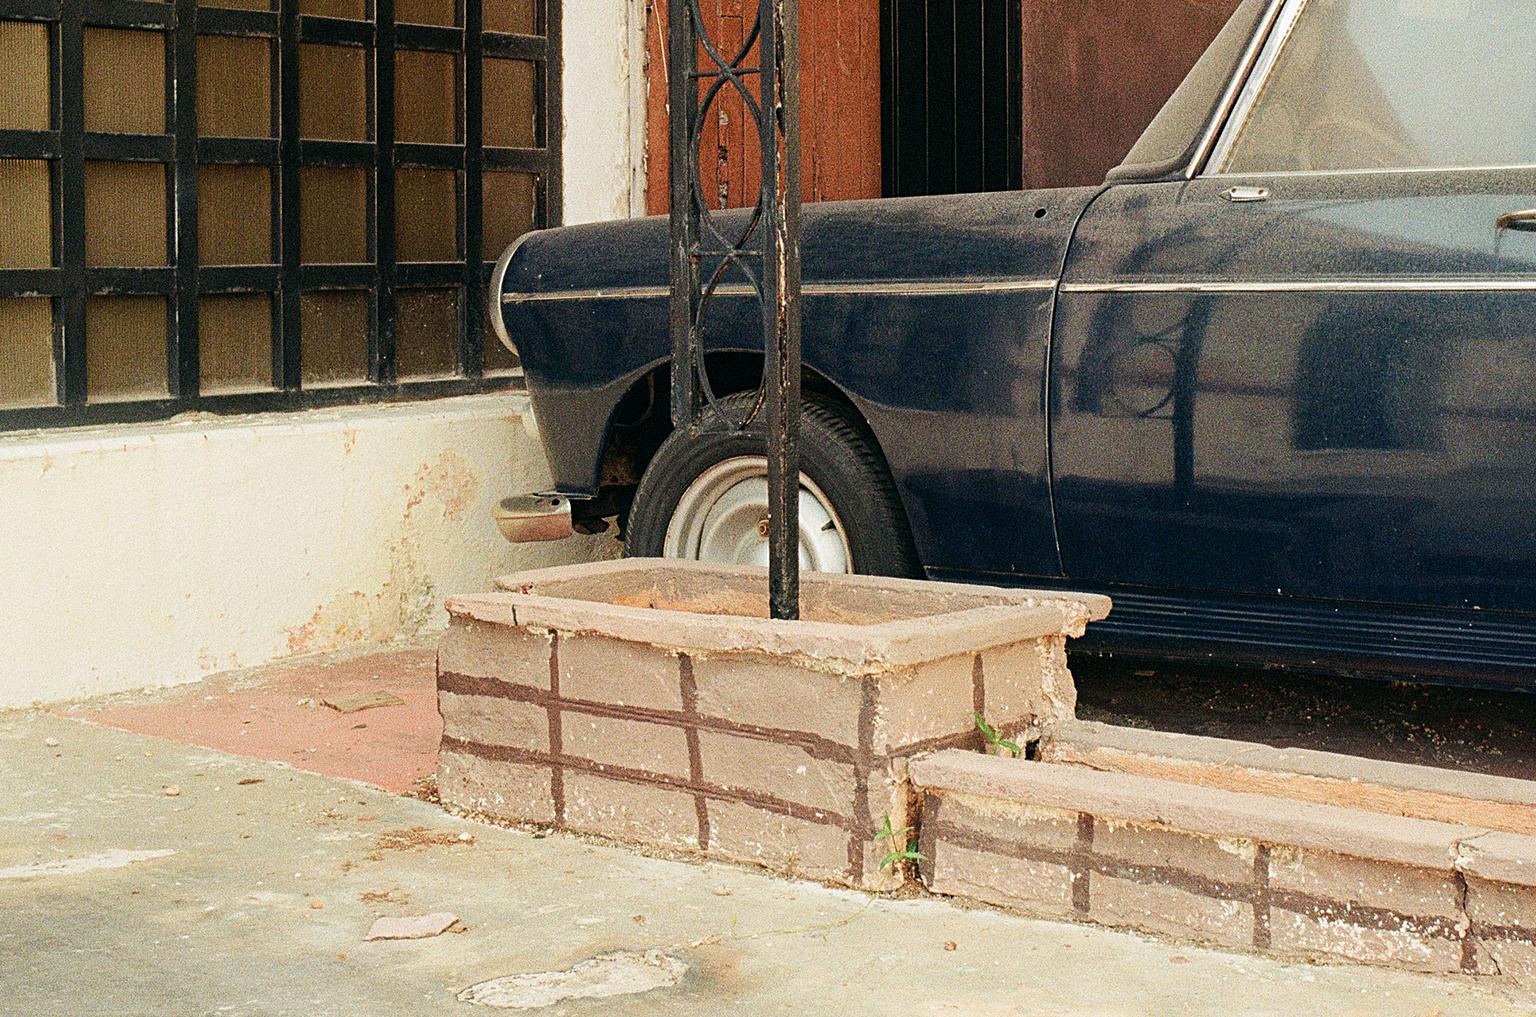 Peugeot, Merida, Mexico, - Photograph by Jim Ryce